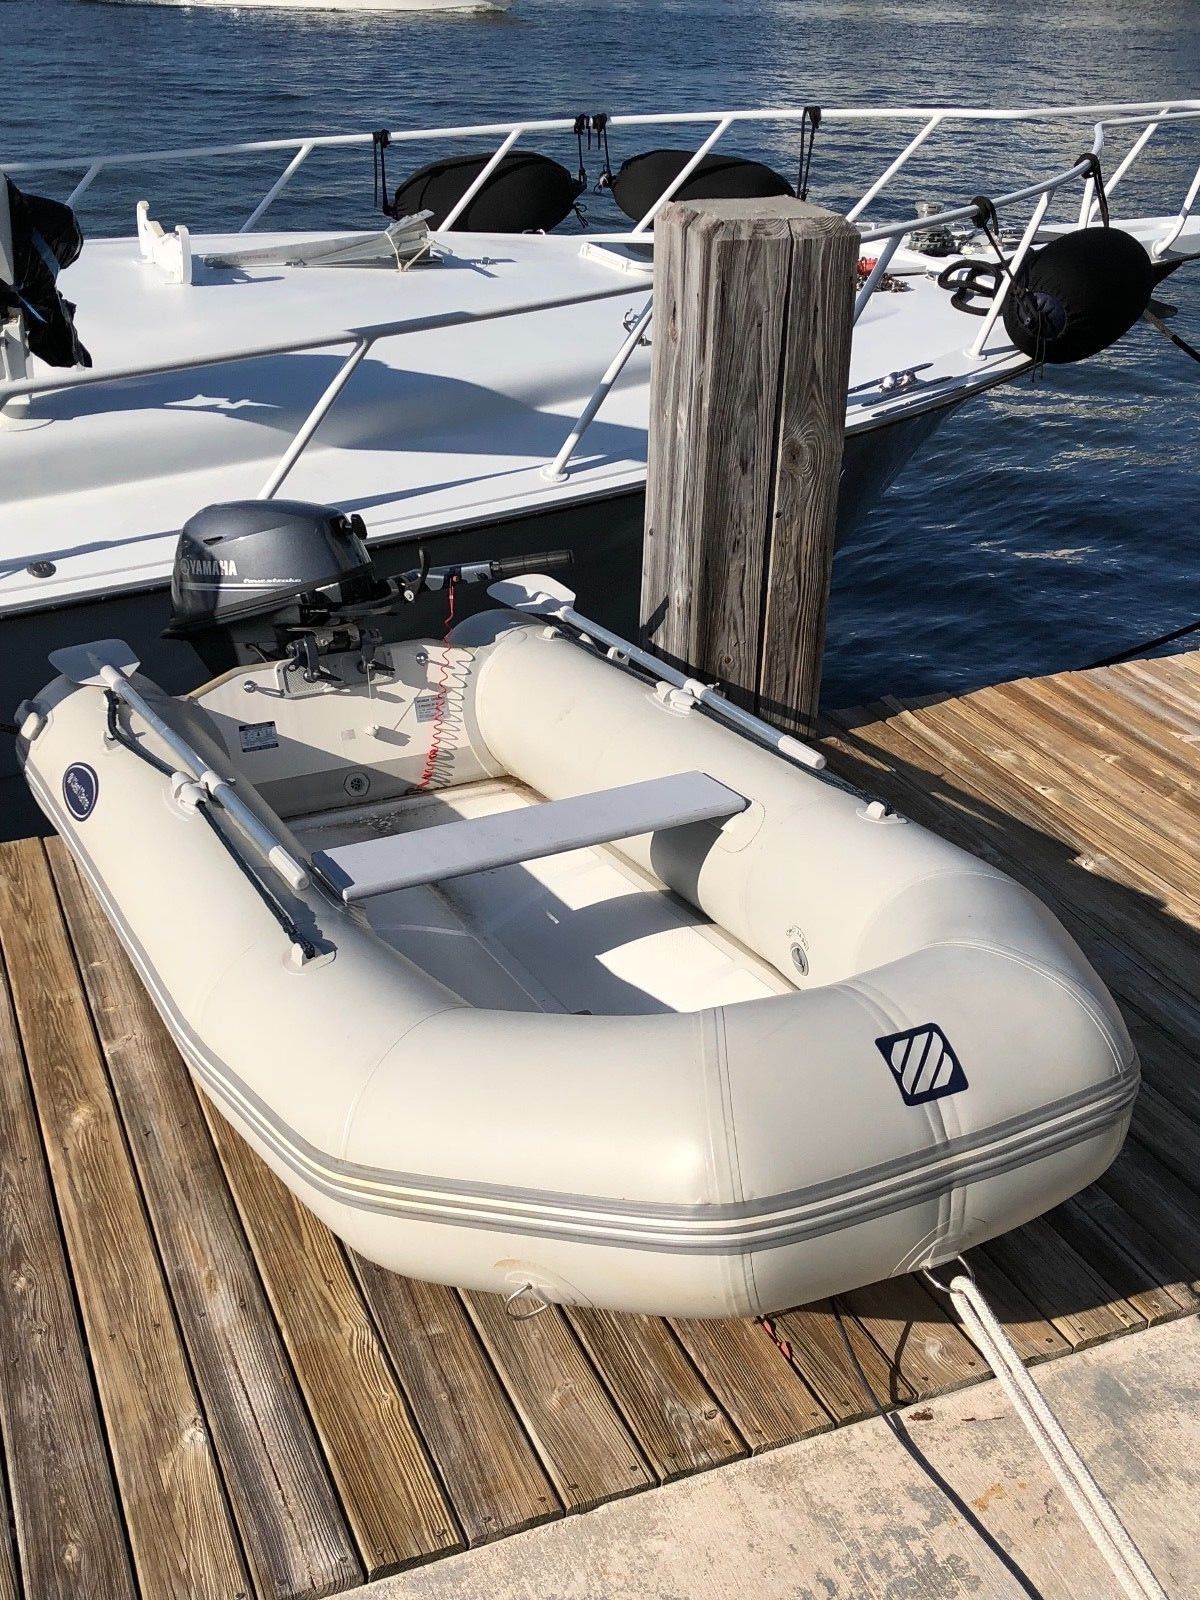 West Marine COMPACT 310 RIB 2016 for sale for $4,000 - Boats-from-USA.com